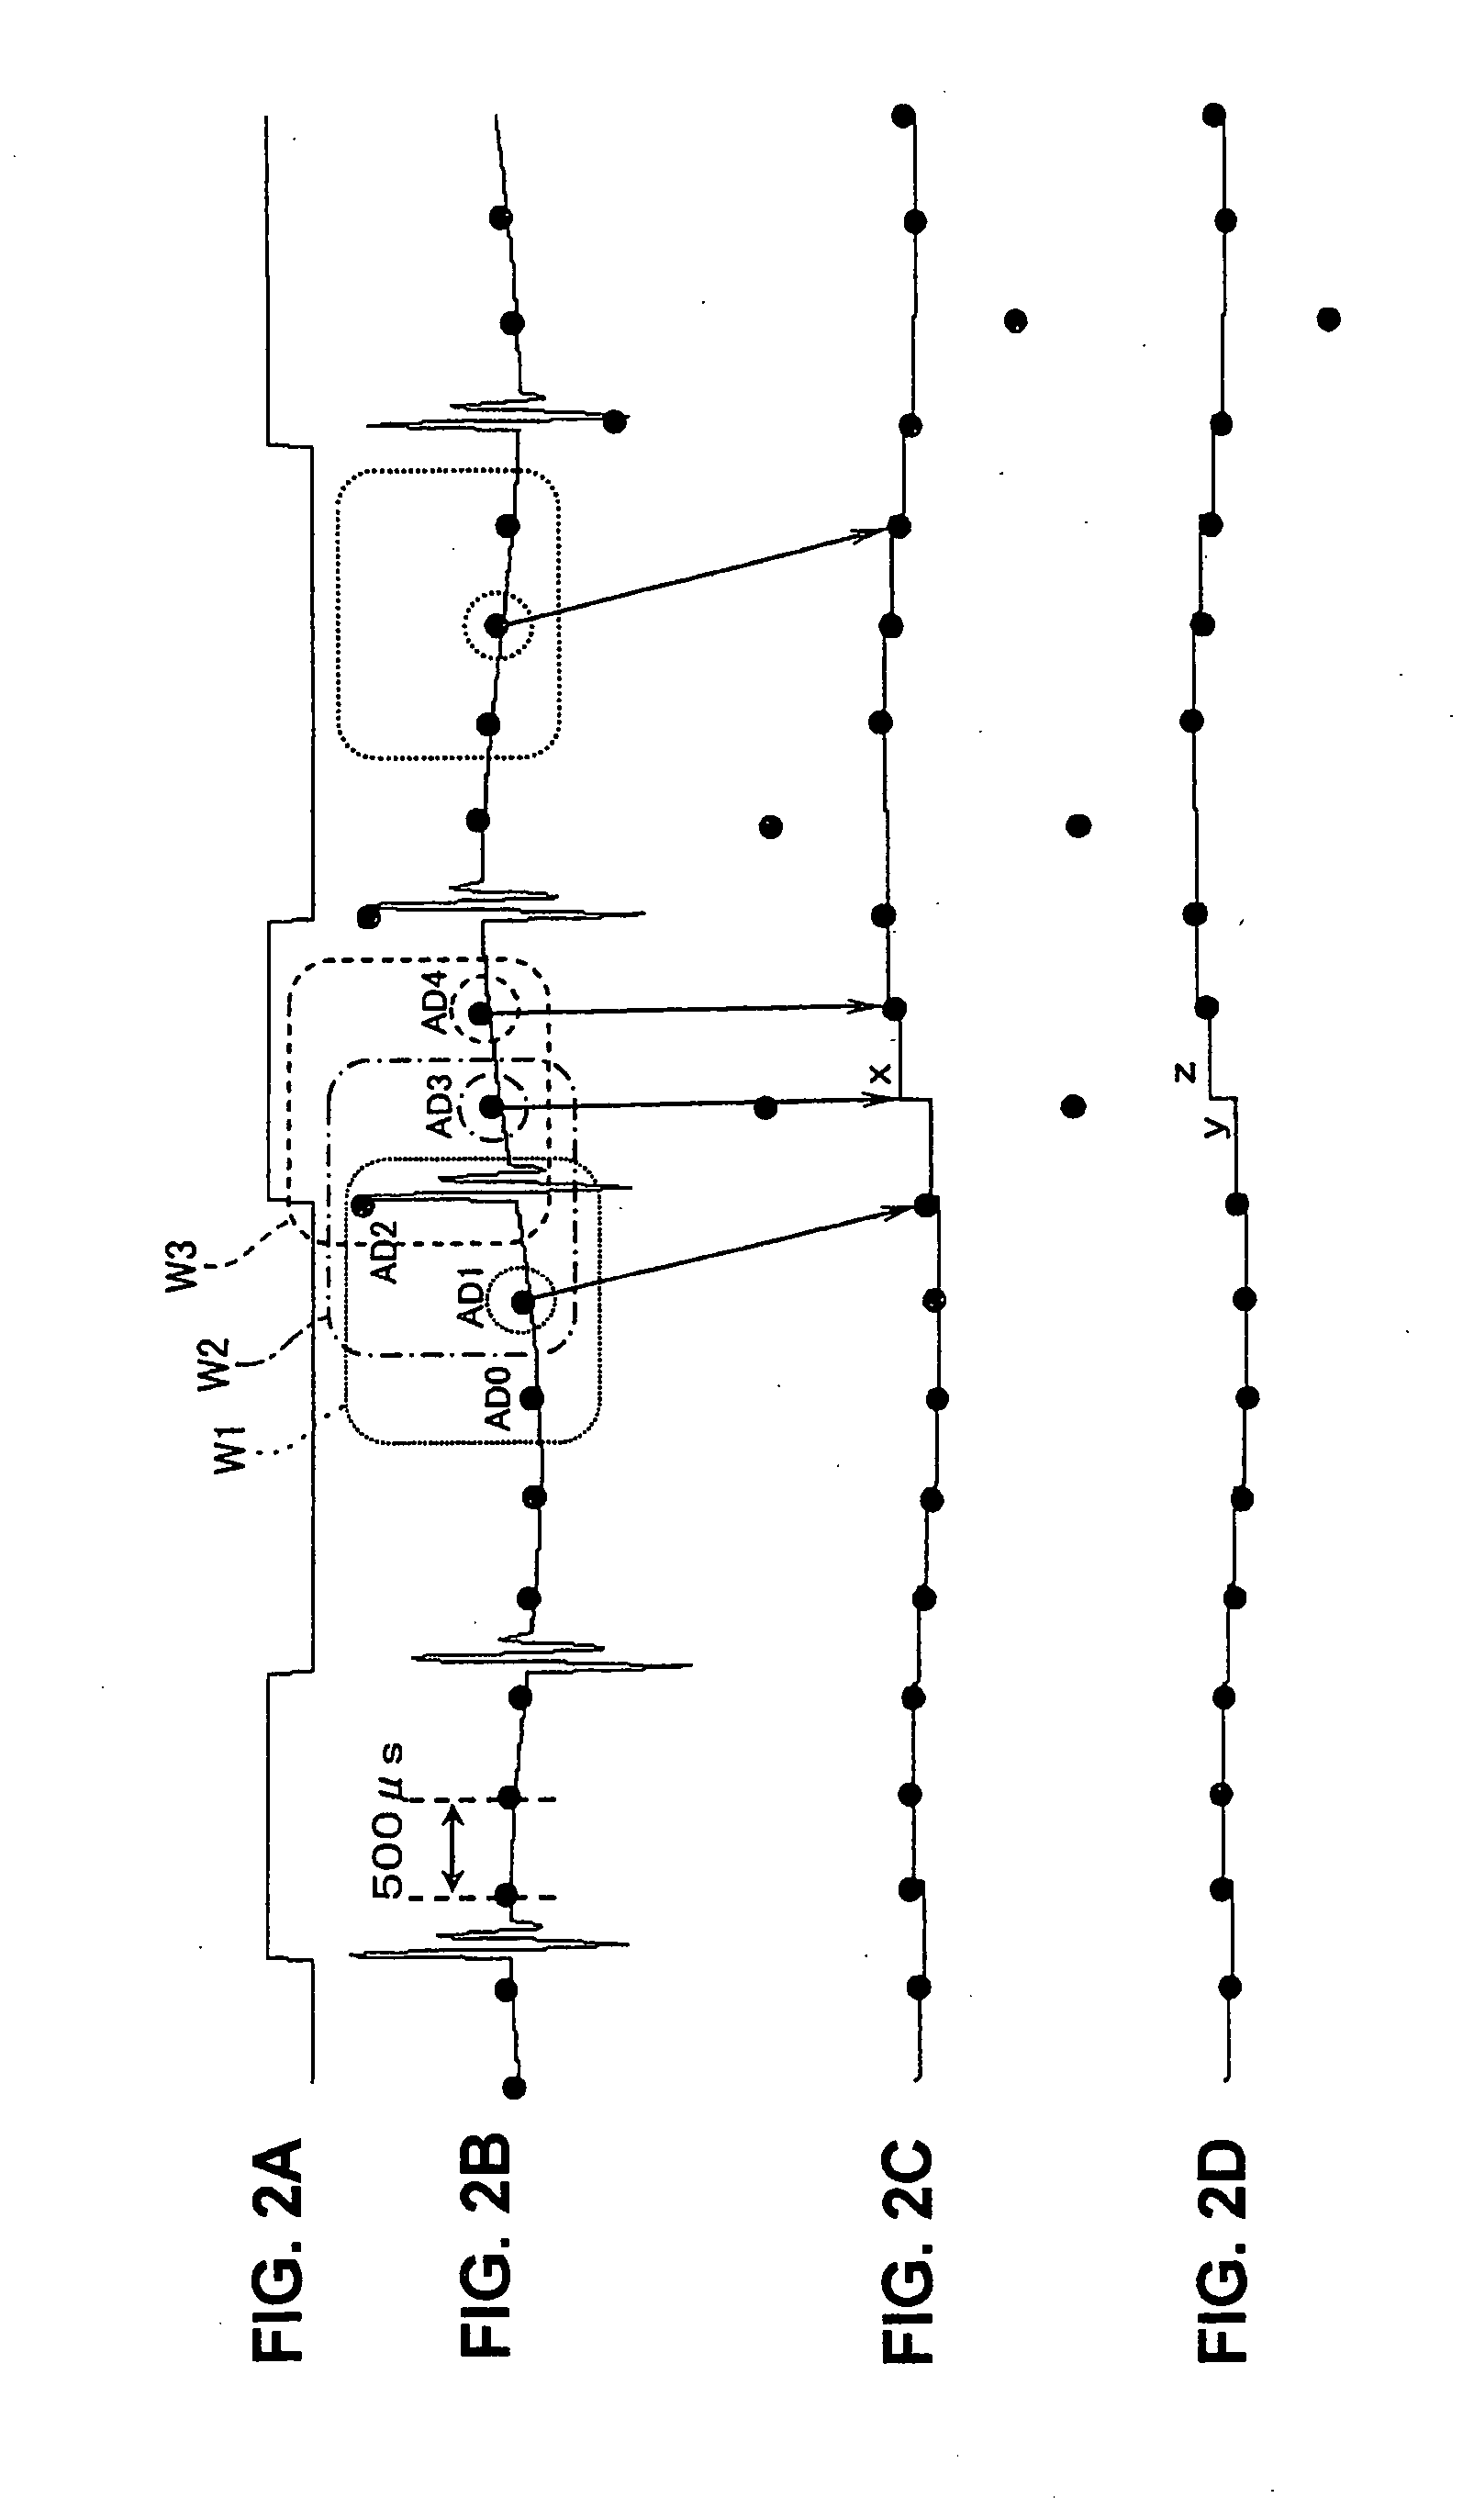 A/d conversion processing apparatus providing improved elimination of effects of noise through digital processing, method of utilizing the a/d conversion processing apparatus, and electronic control apparatus incorporating the a/d conversion processing apparatus